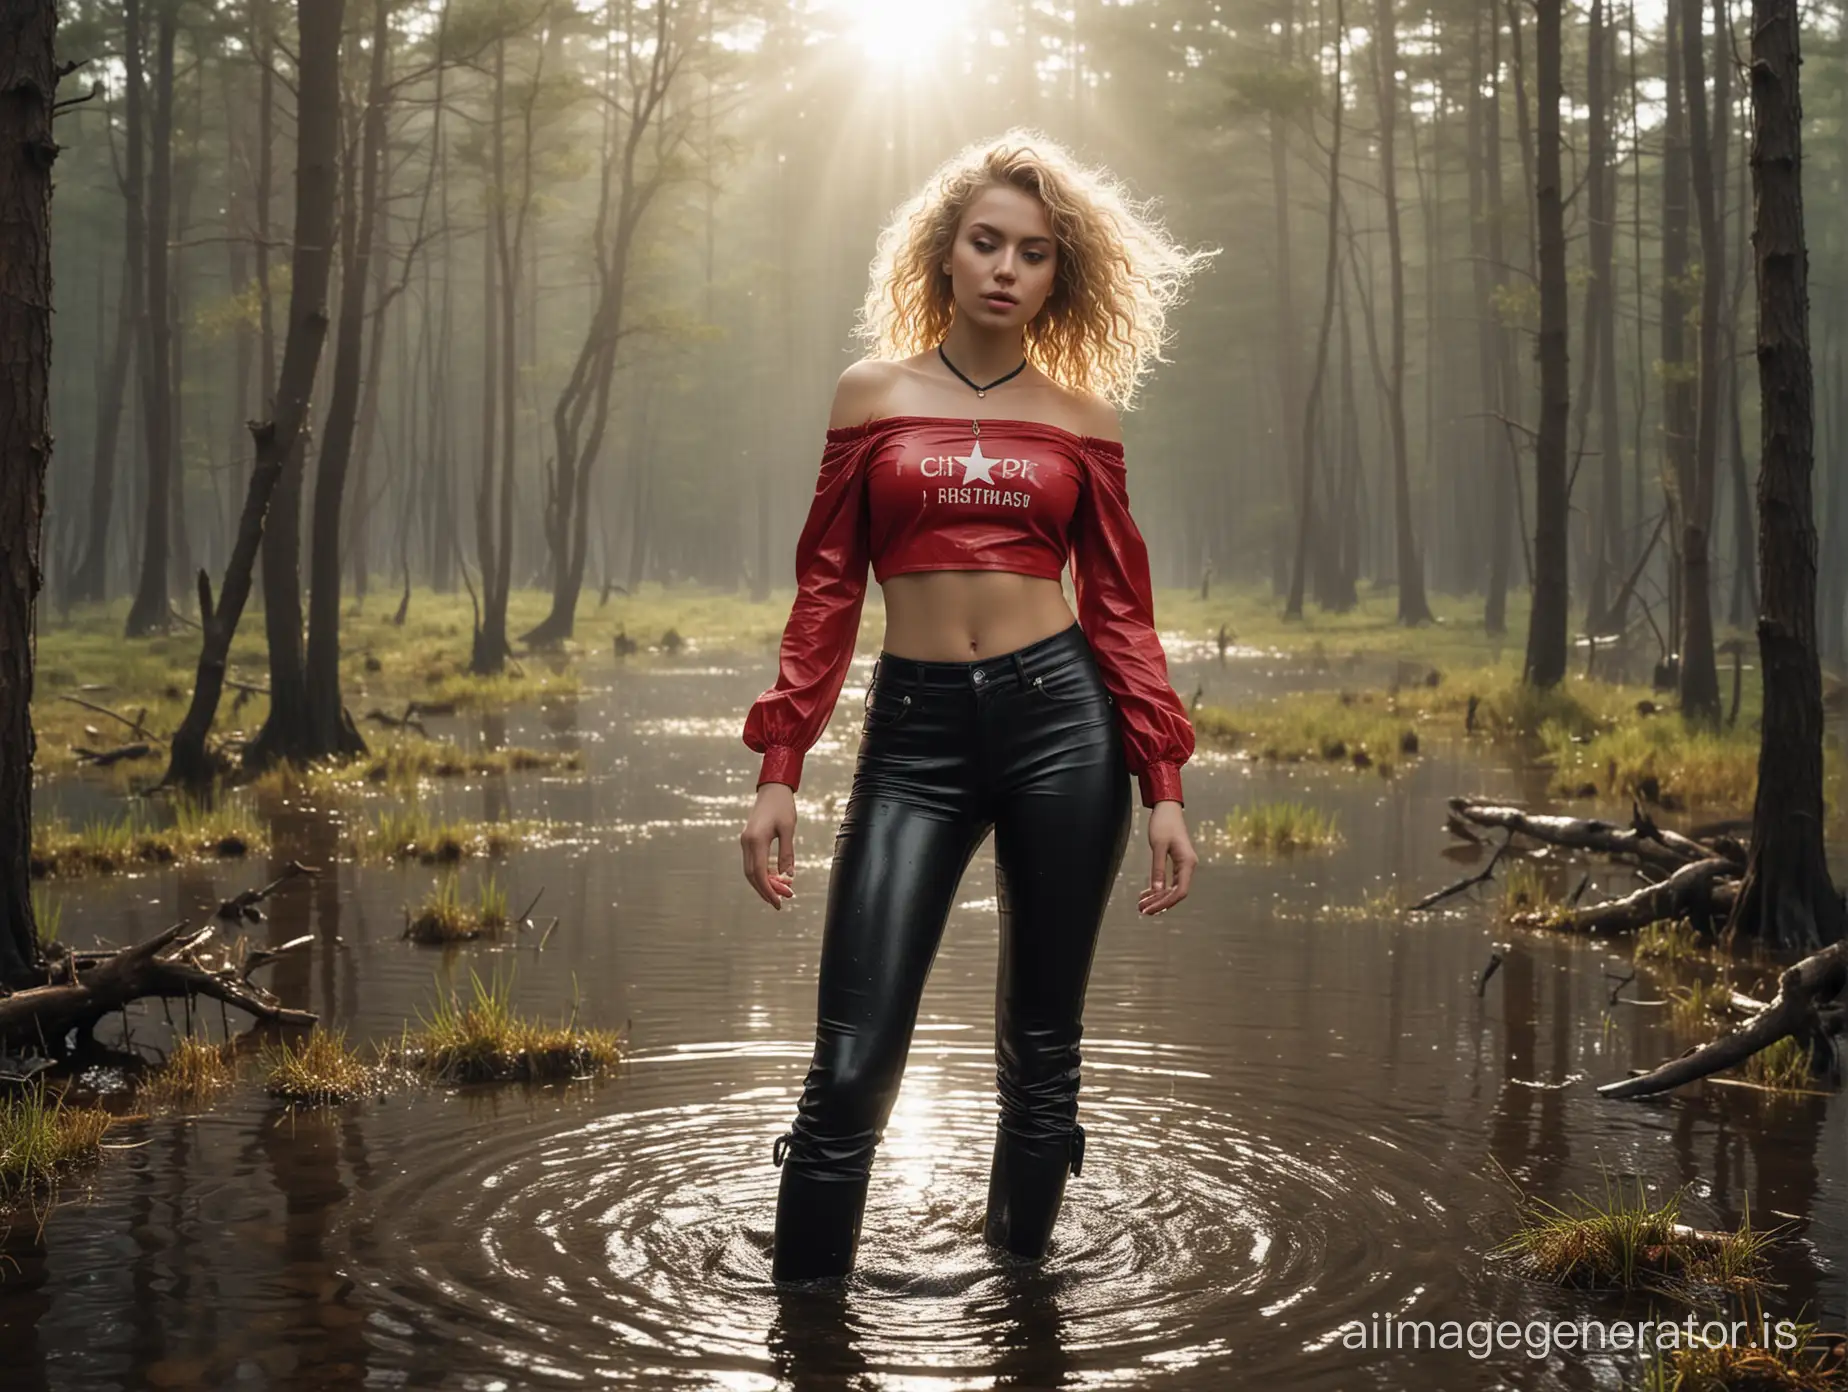 Fashion-Model-in-CCCP-Inspired-Attire-Posing-in-Swamp-at-Dawn